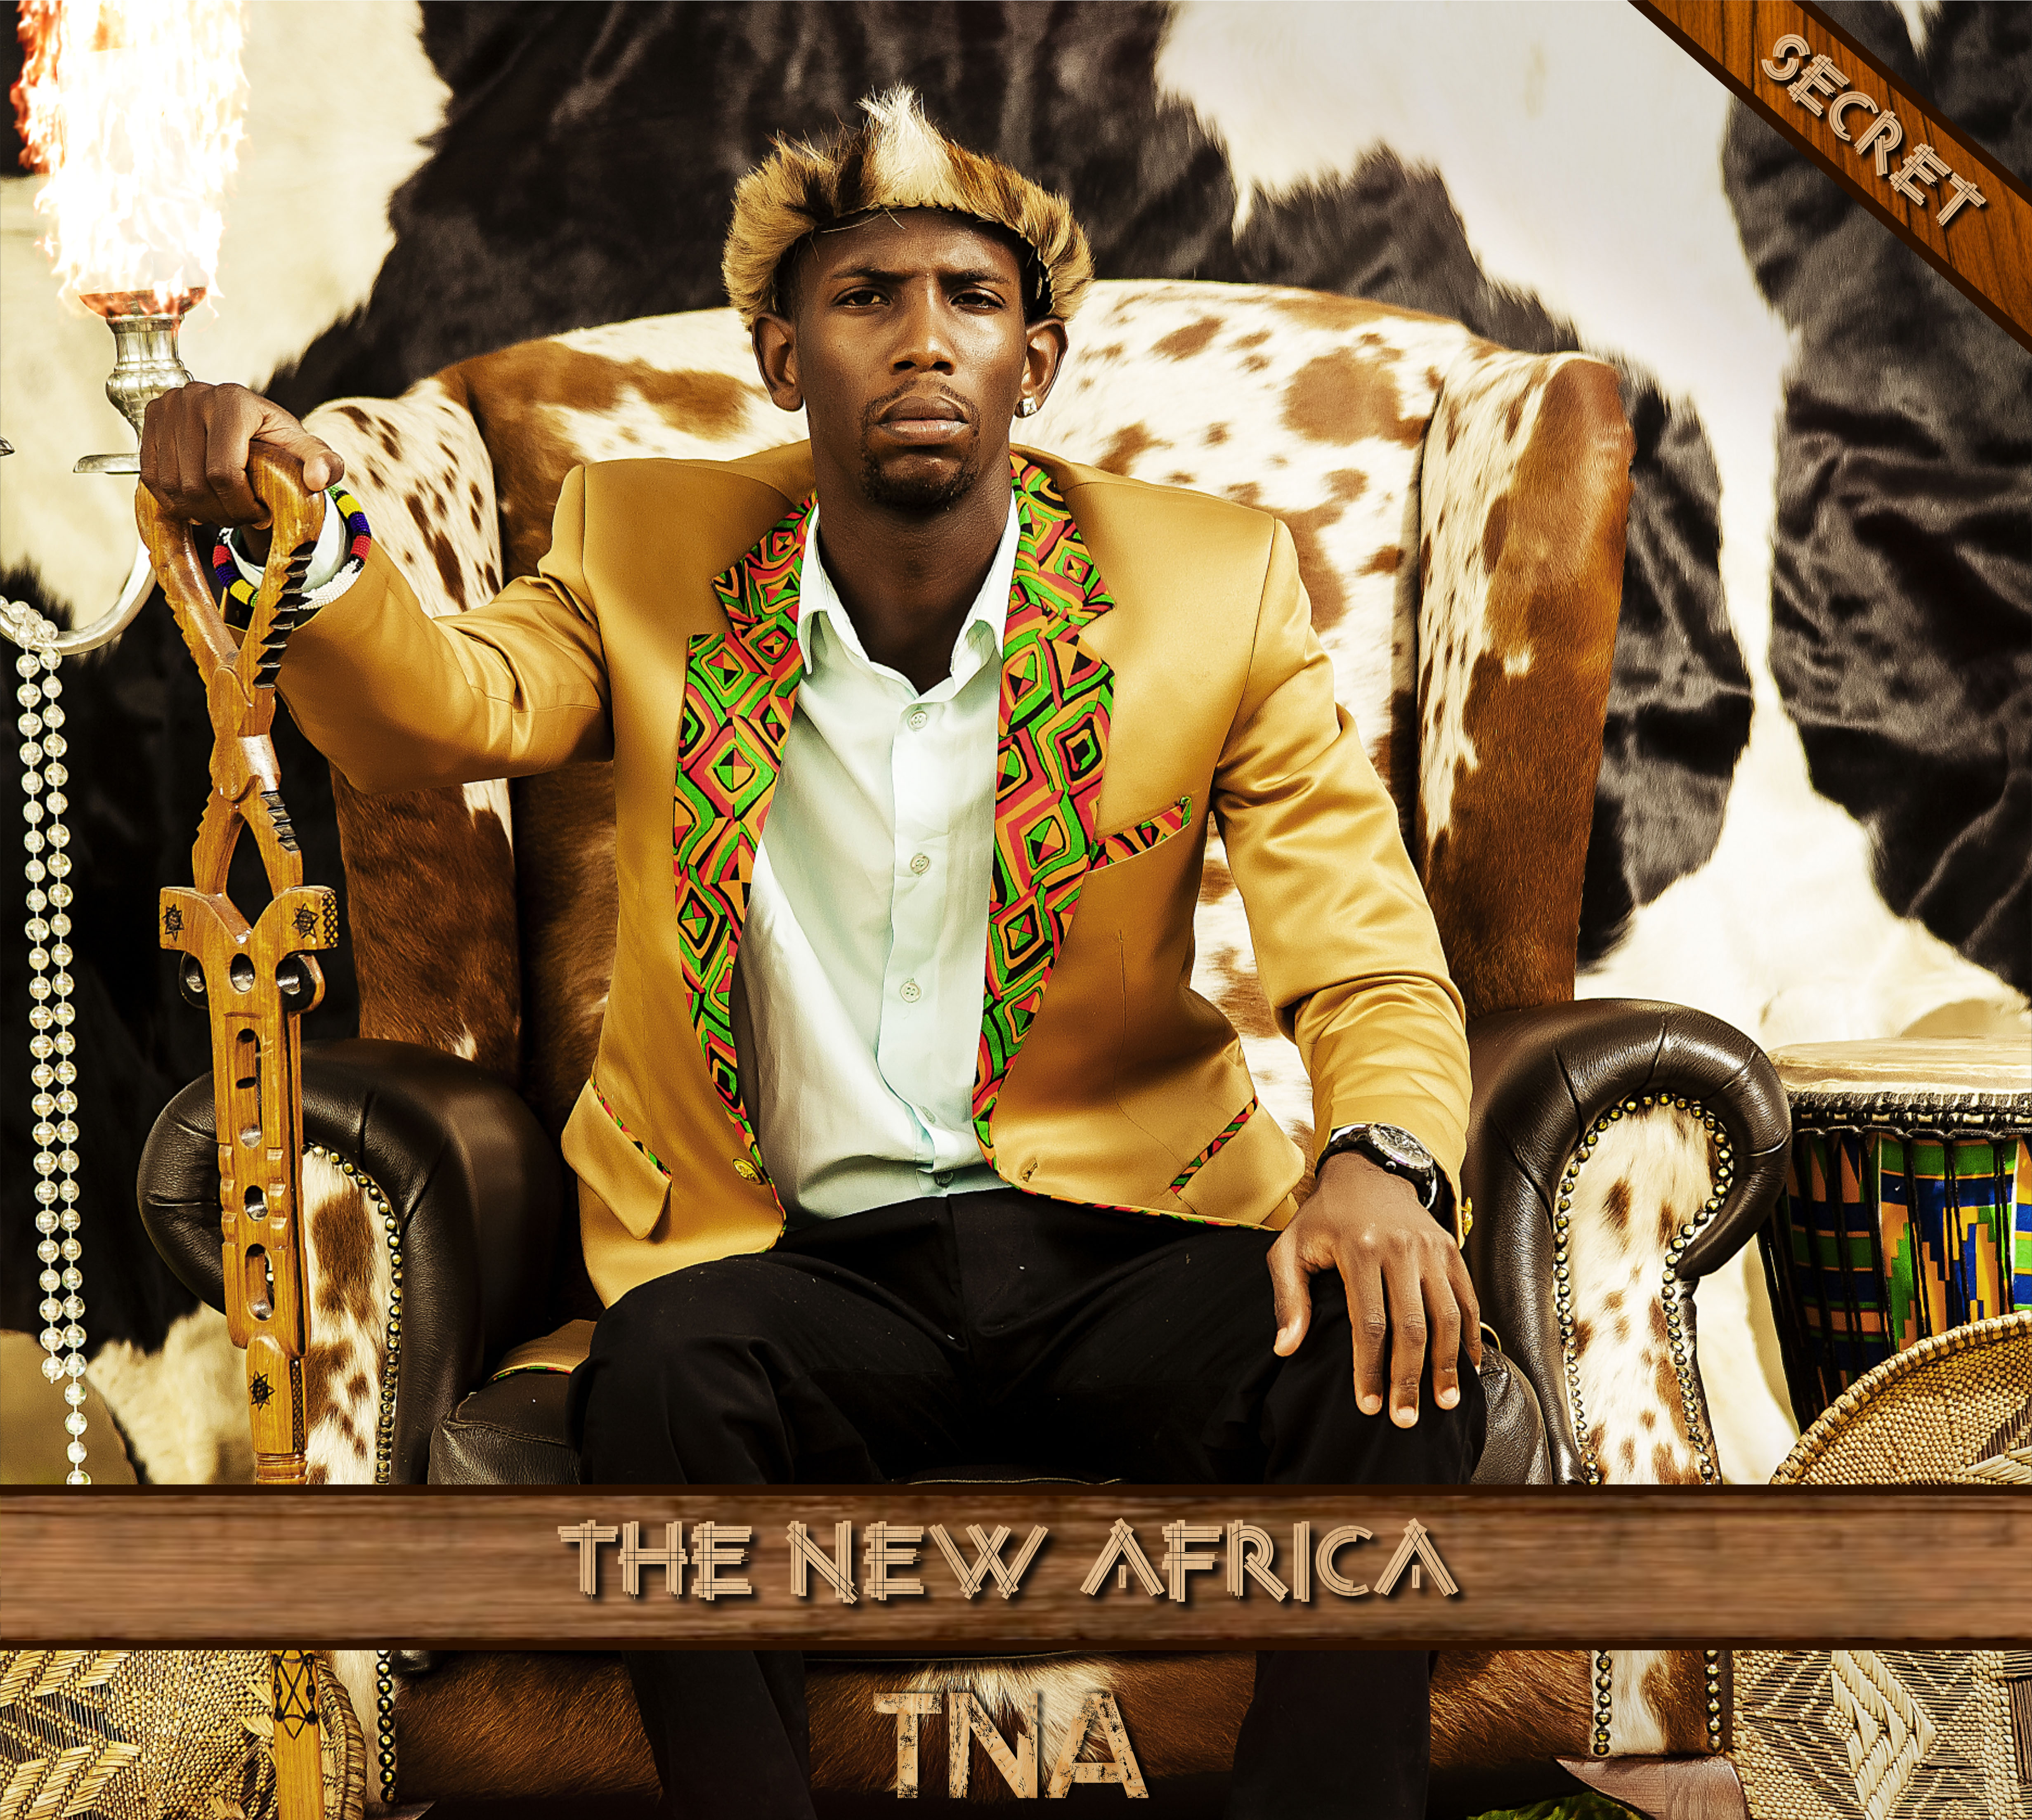 The New Africa (Tna) by Secret | Album